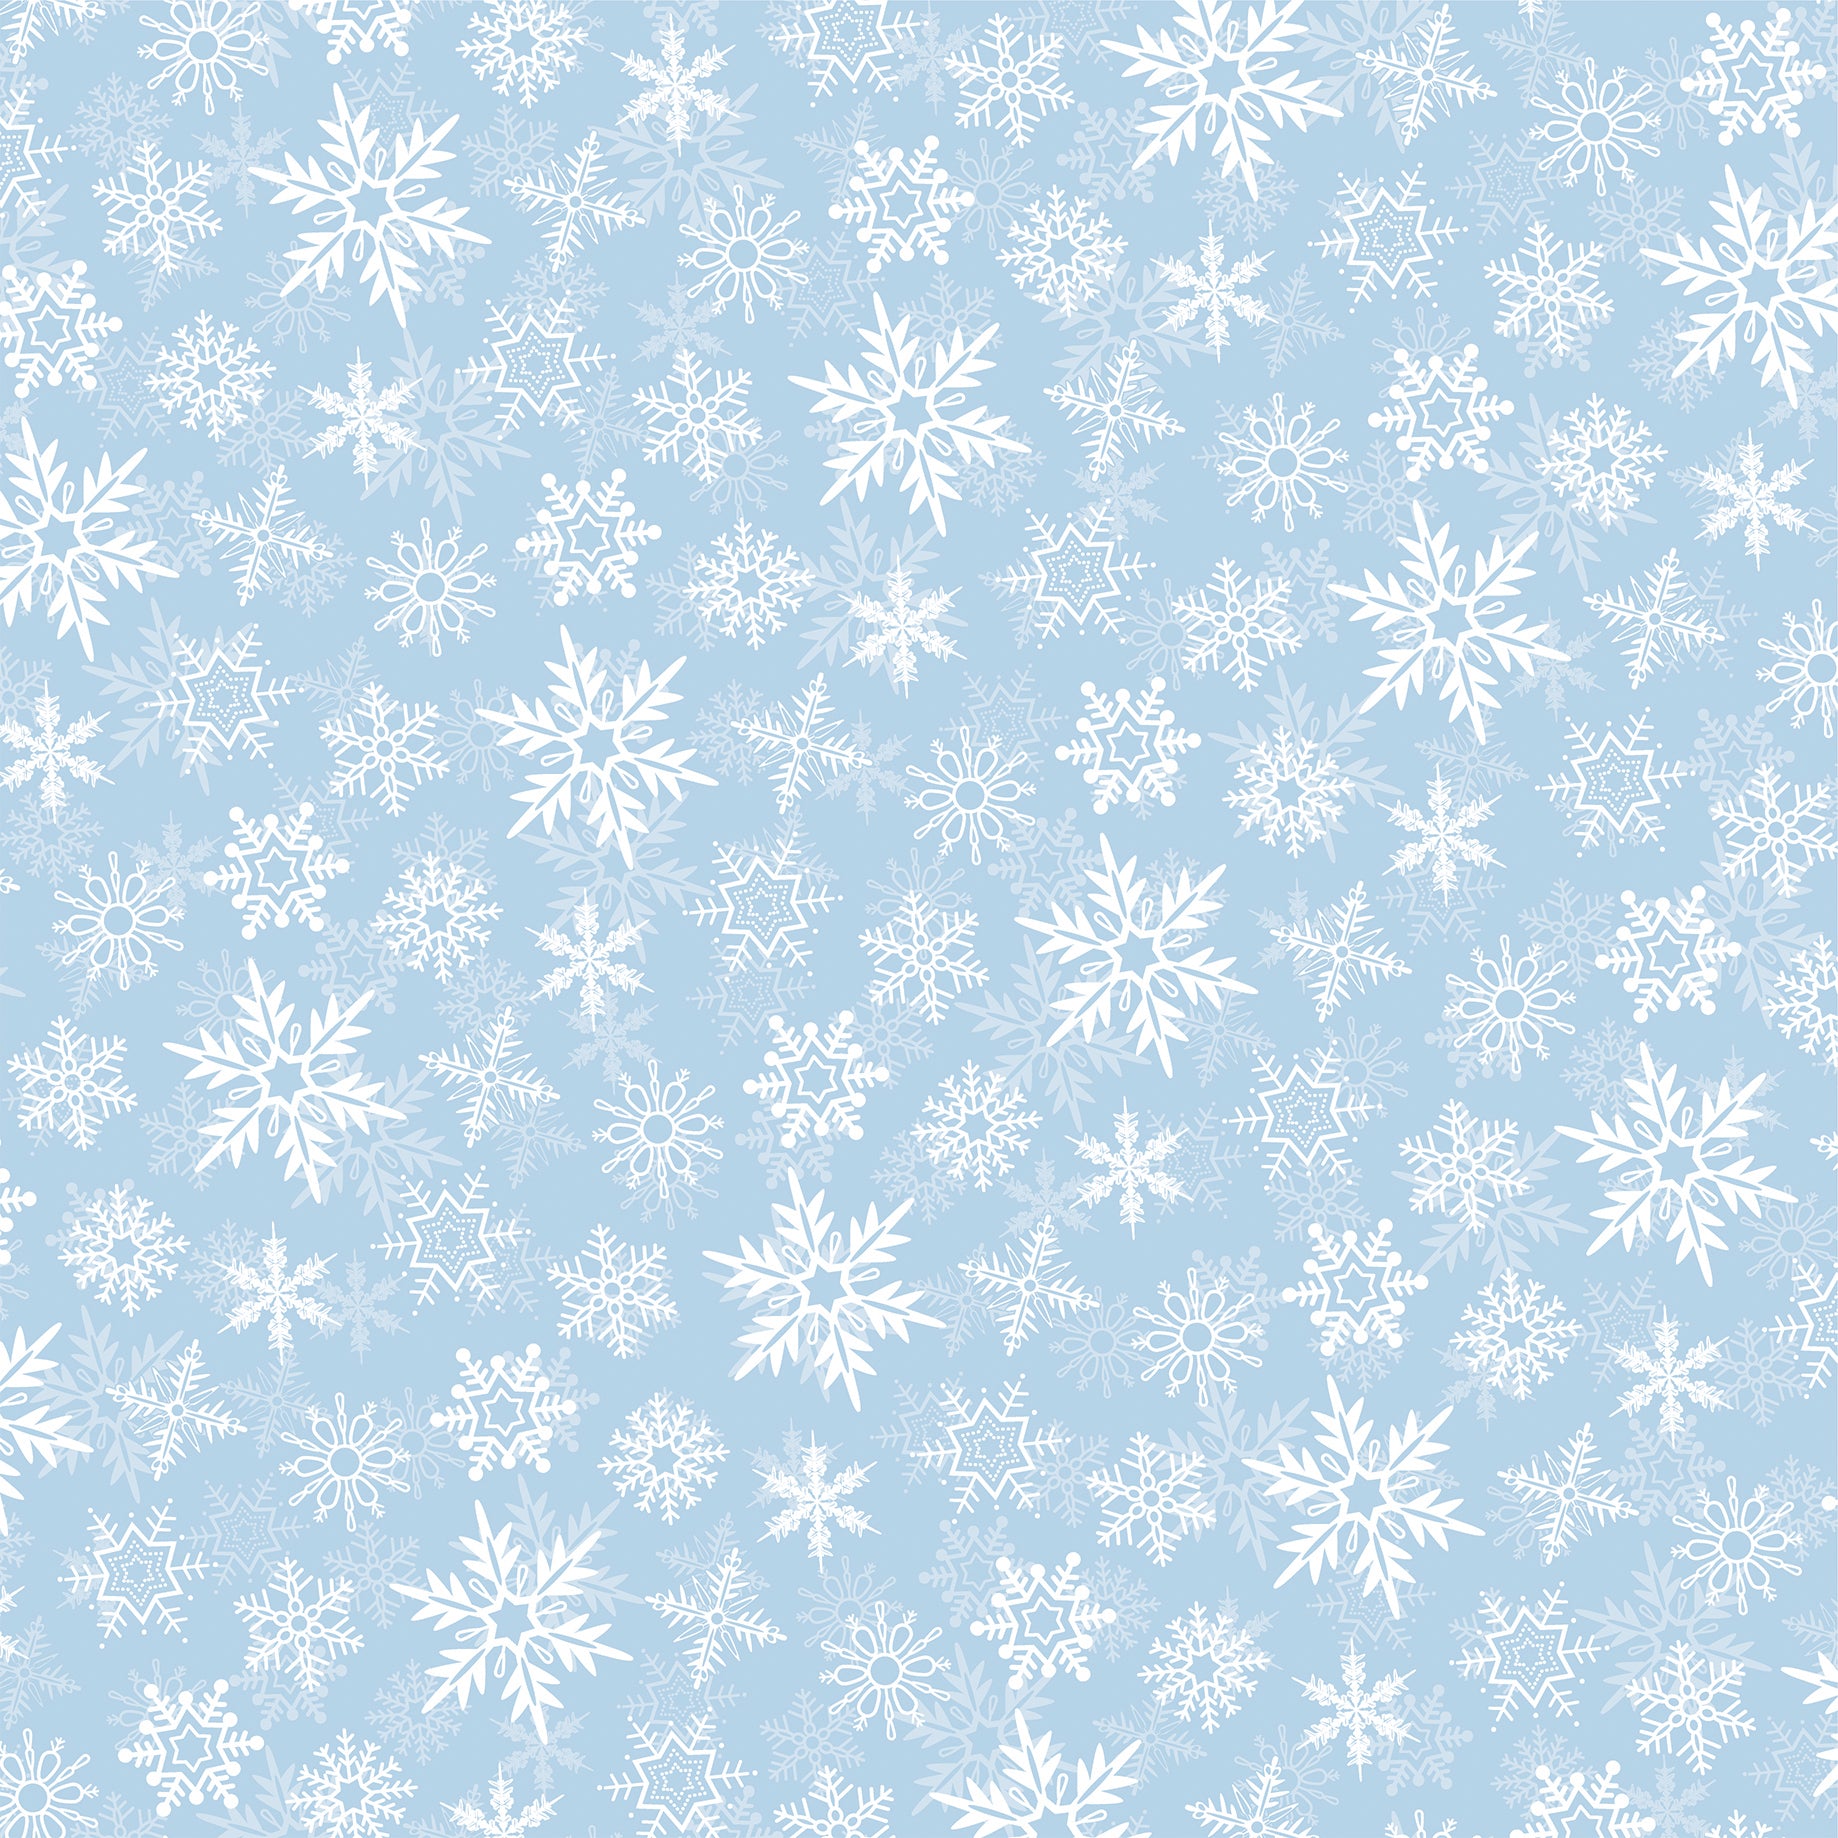 Wintertime Collection Falling Flakes 12 x 12 Double-Sided Scrapbook Paper by Carta Bella